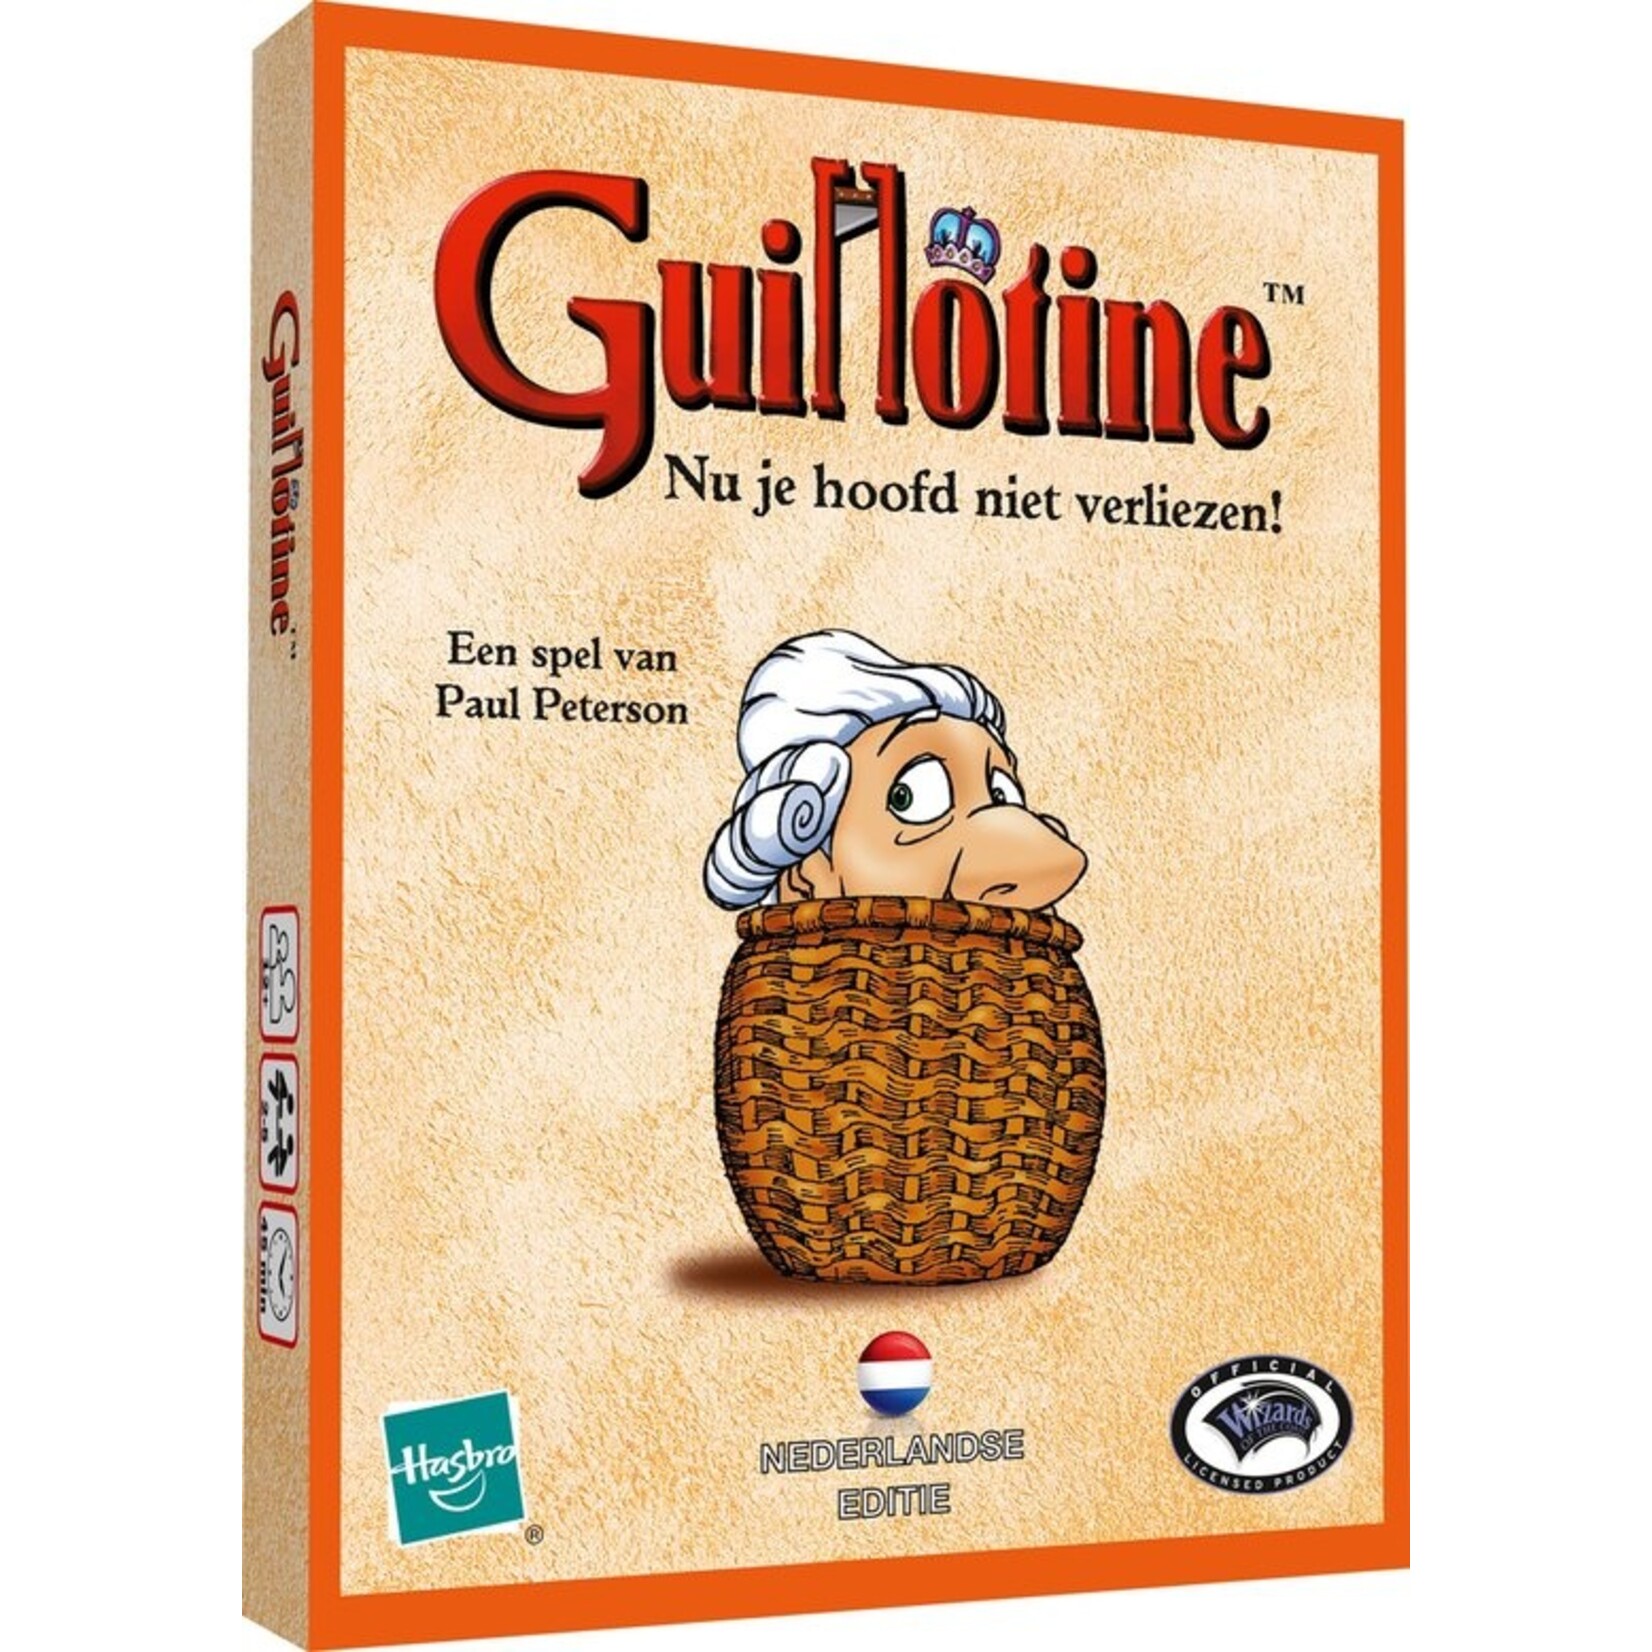 Wizards of the Coast Guillotine (NL)